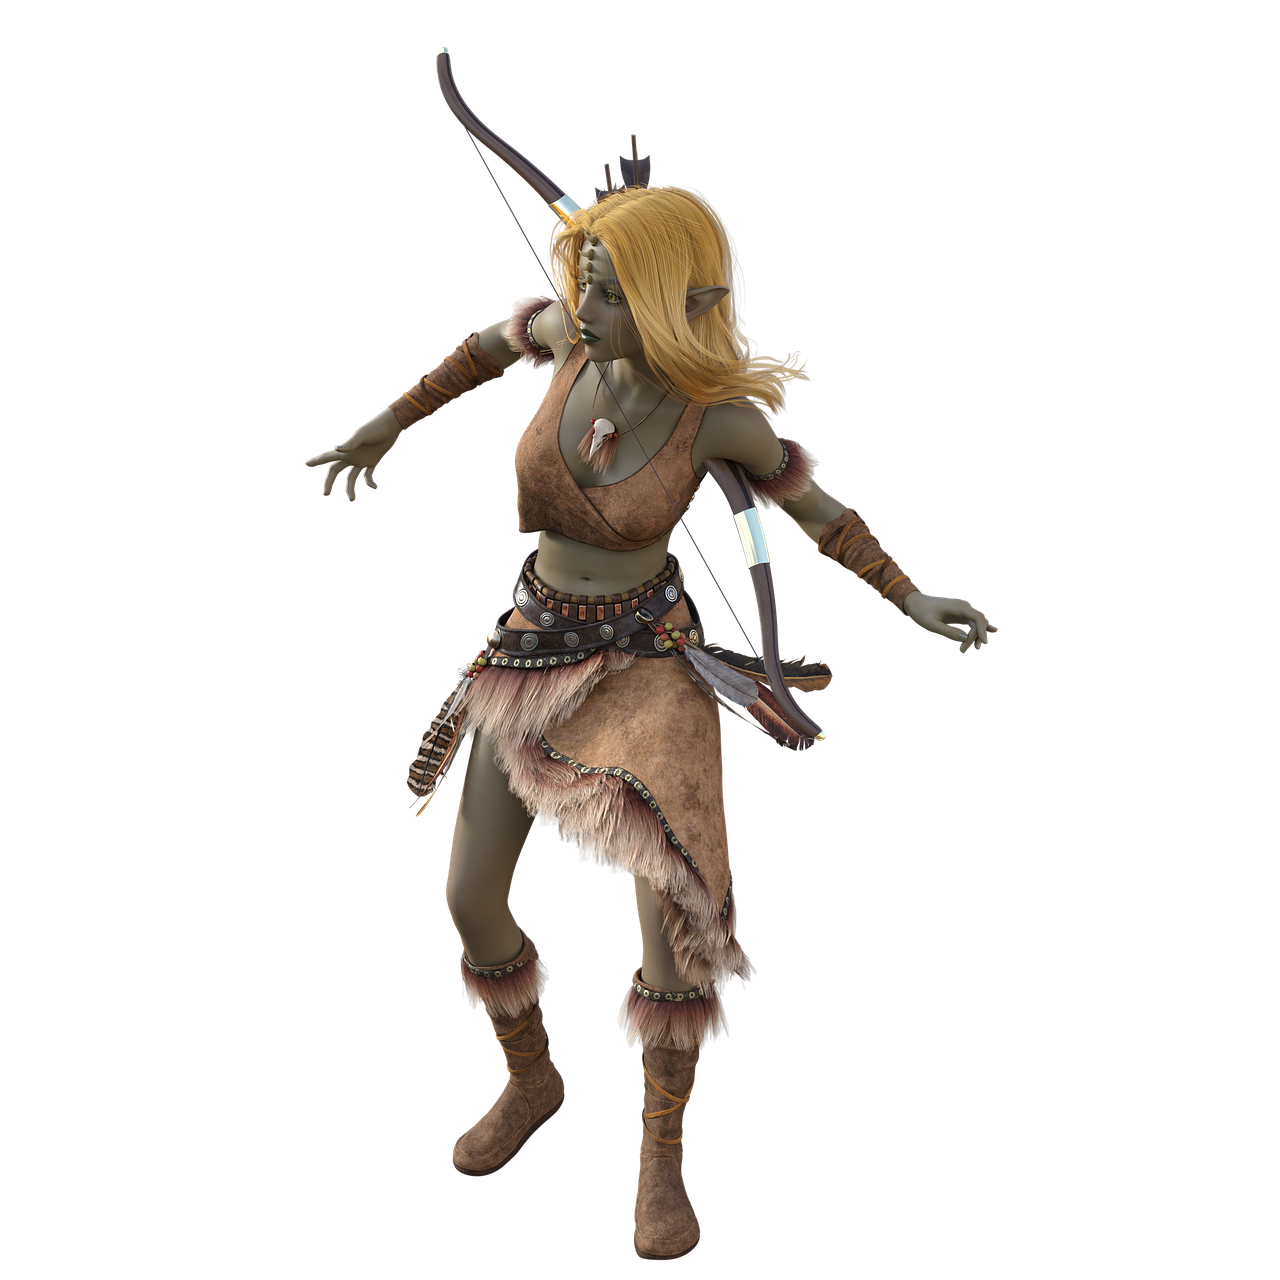 a woman in a costume holding a bow and arrow, by senior character artist, zbrush central contest winner, renaissance, wearing cave man clothes, she is dancing. realistic, ingame image, female humanoid creature